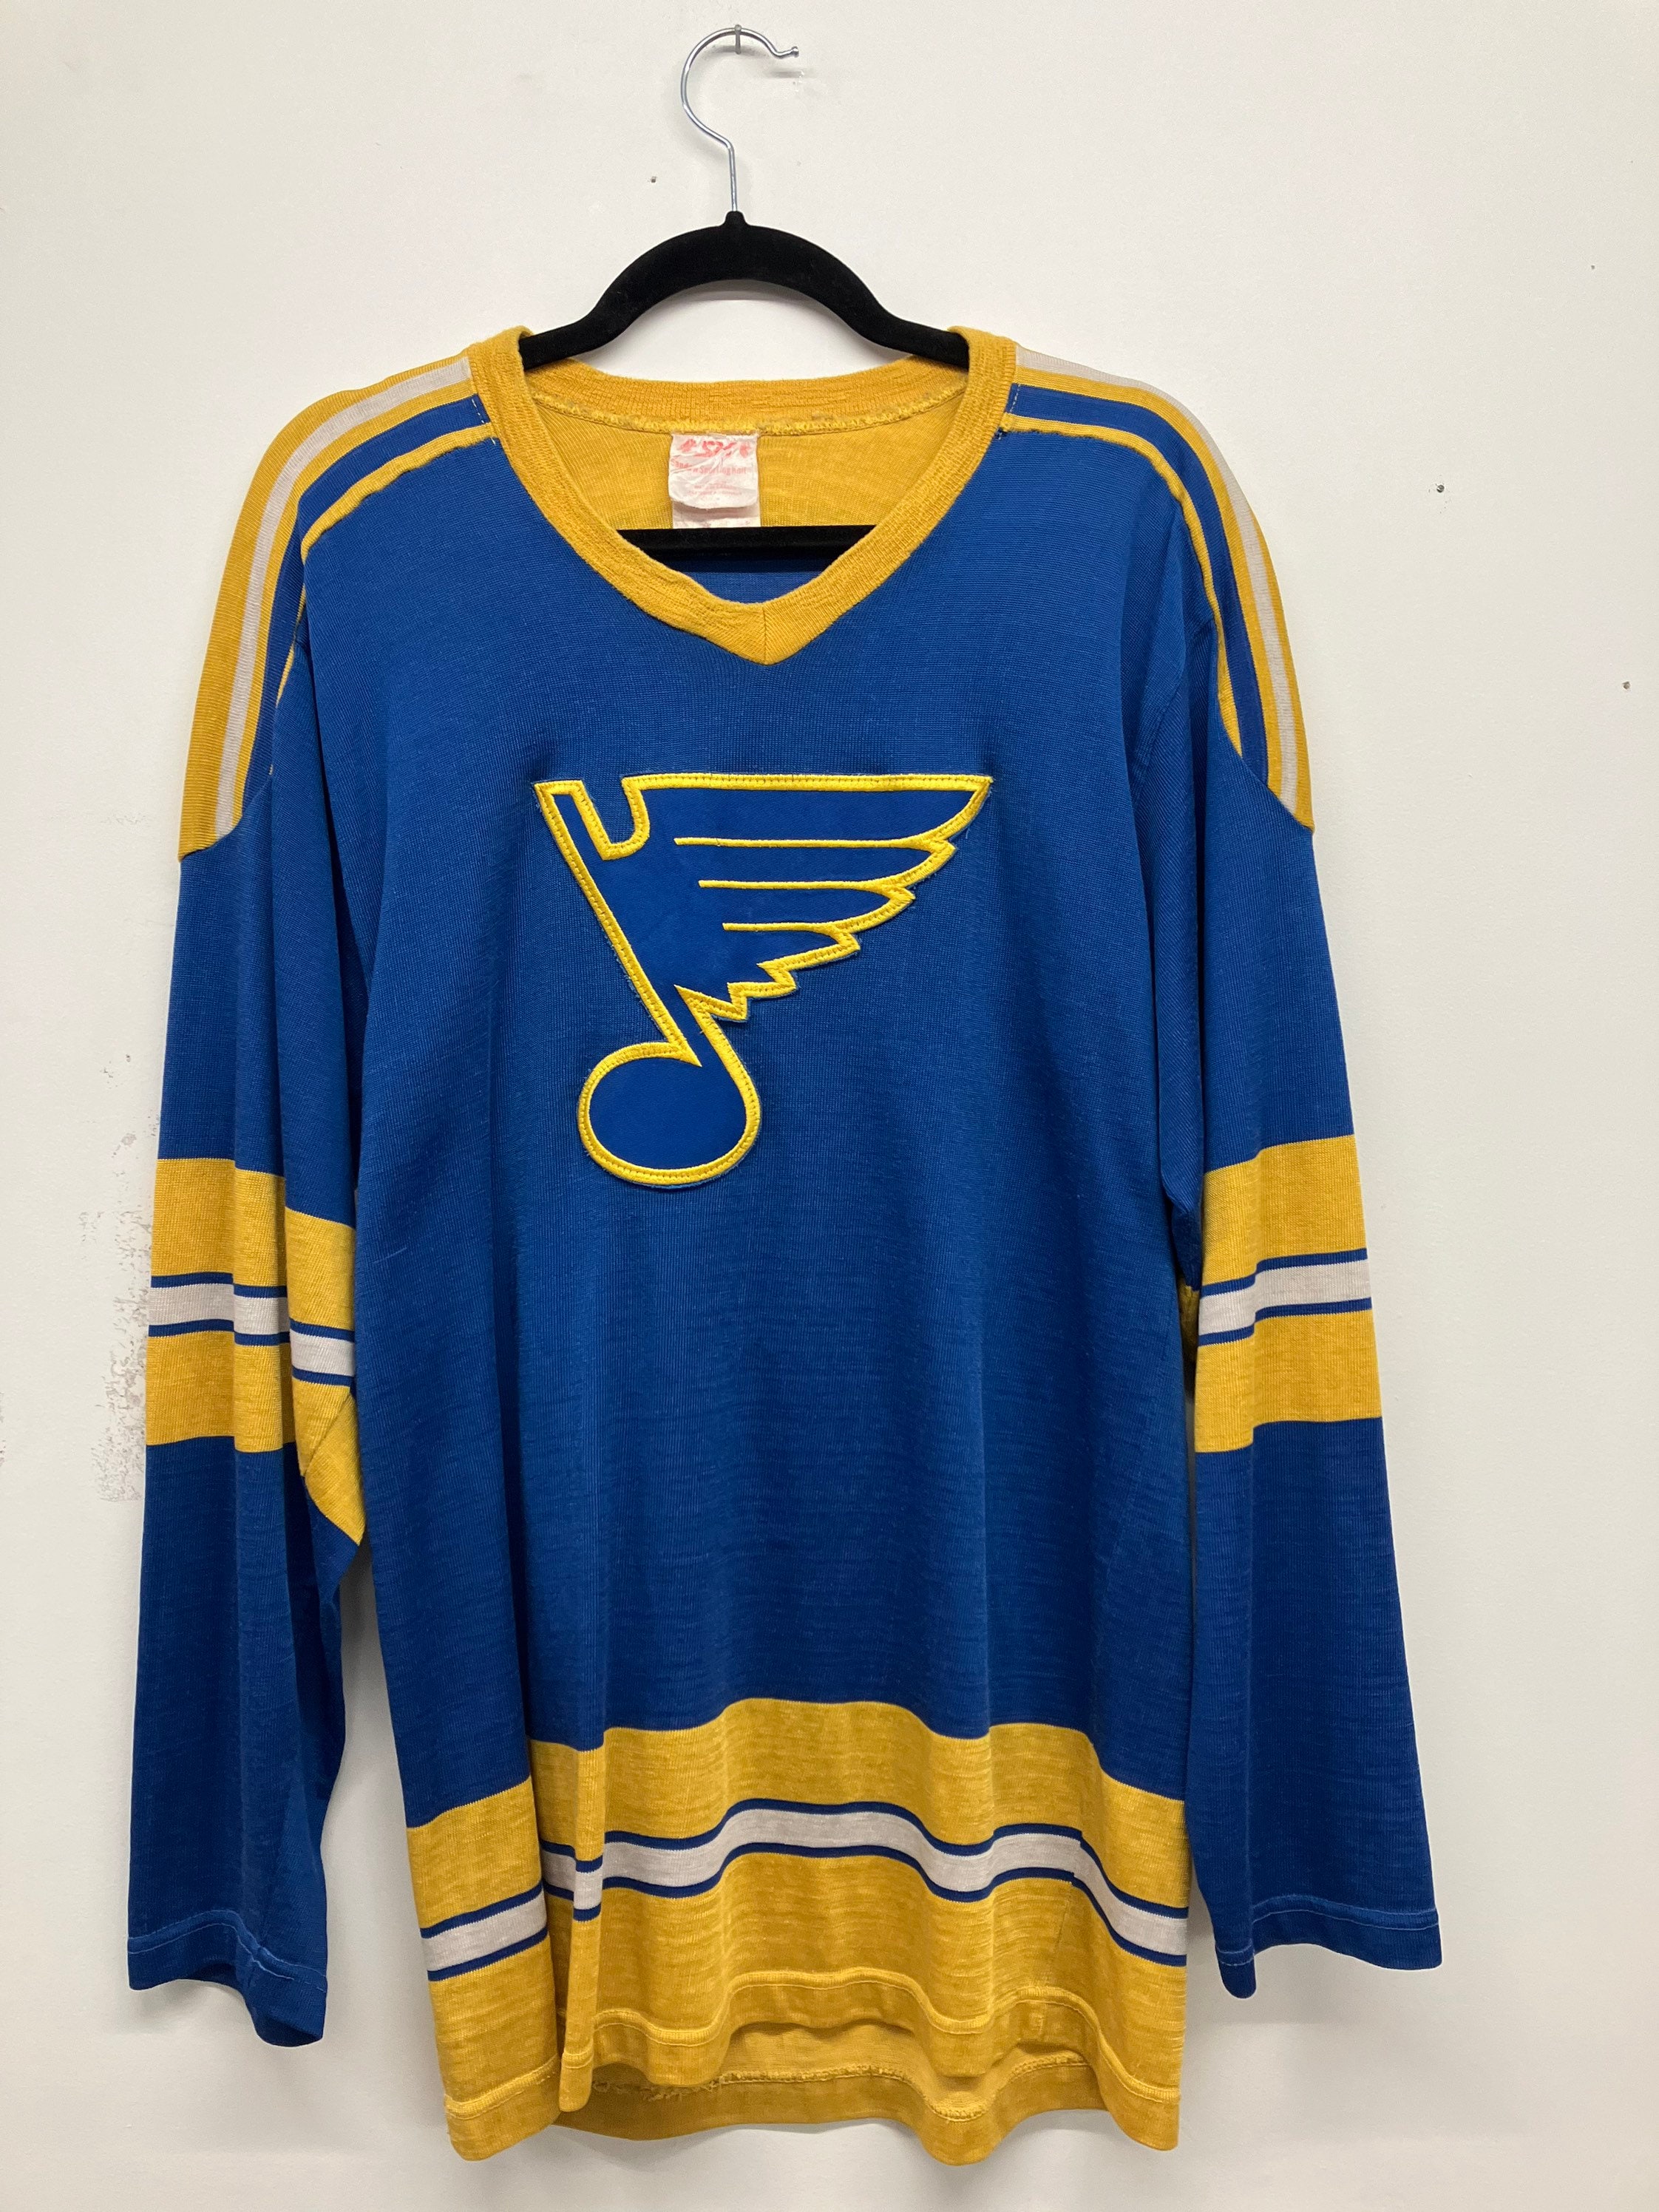 Brian Sutter 1979 St. Louis Blues Vintage Throwback NHL Hockey Jersey